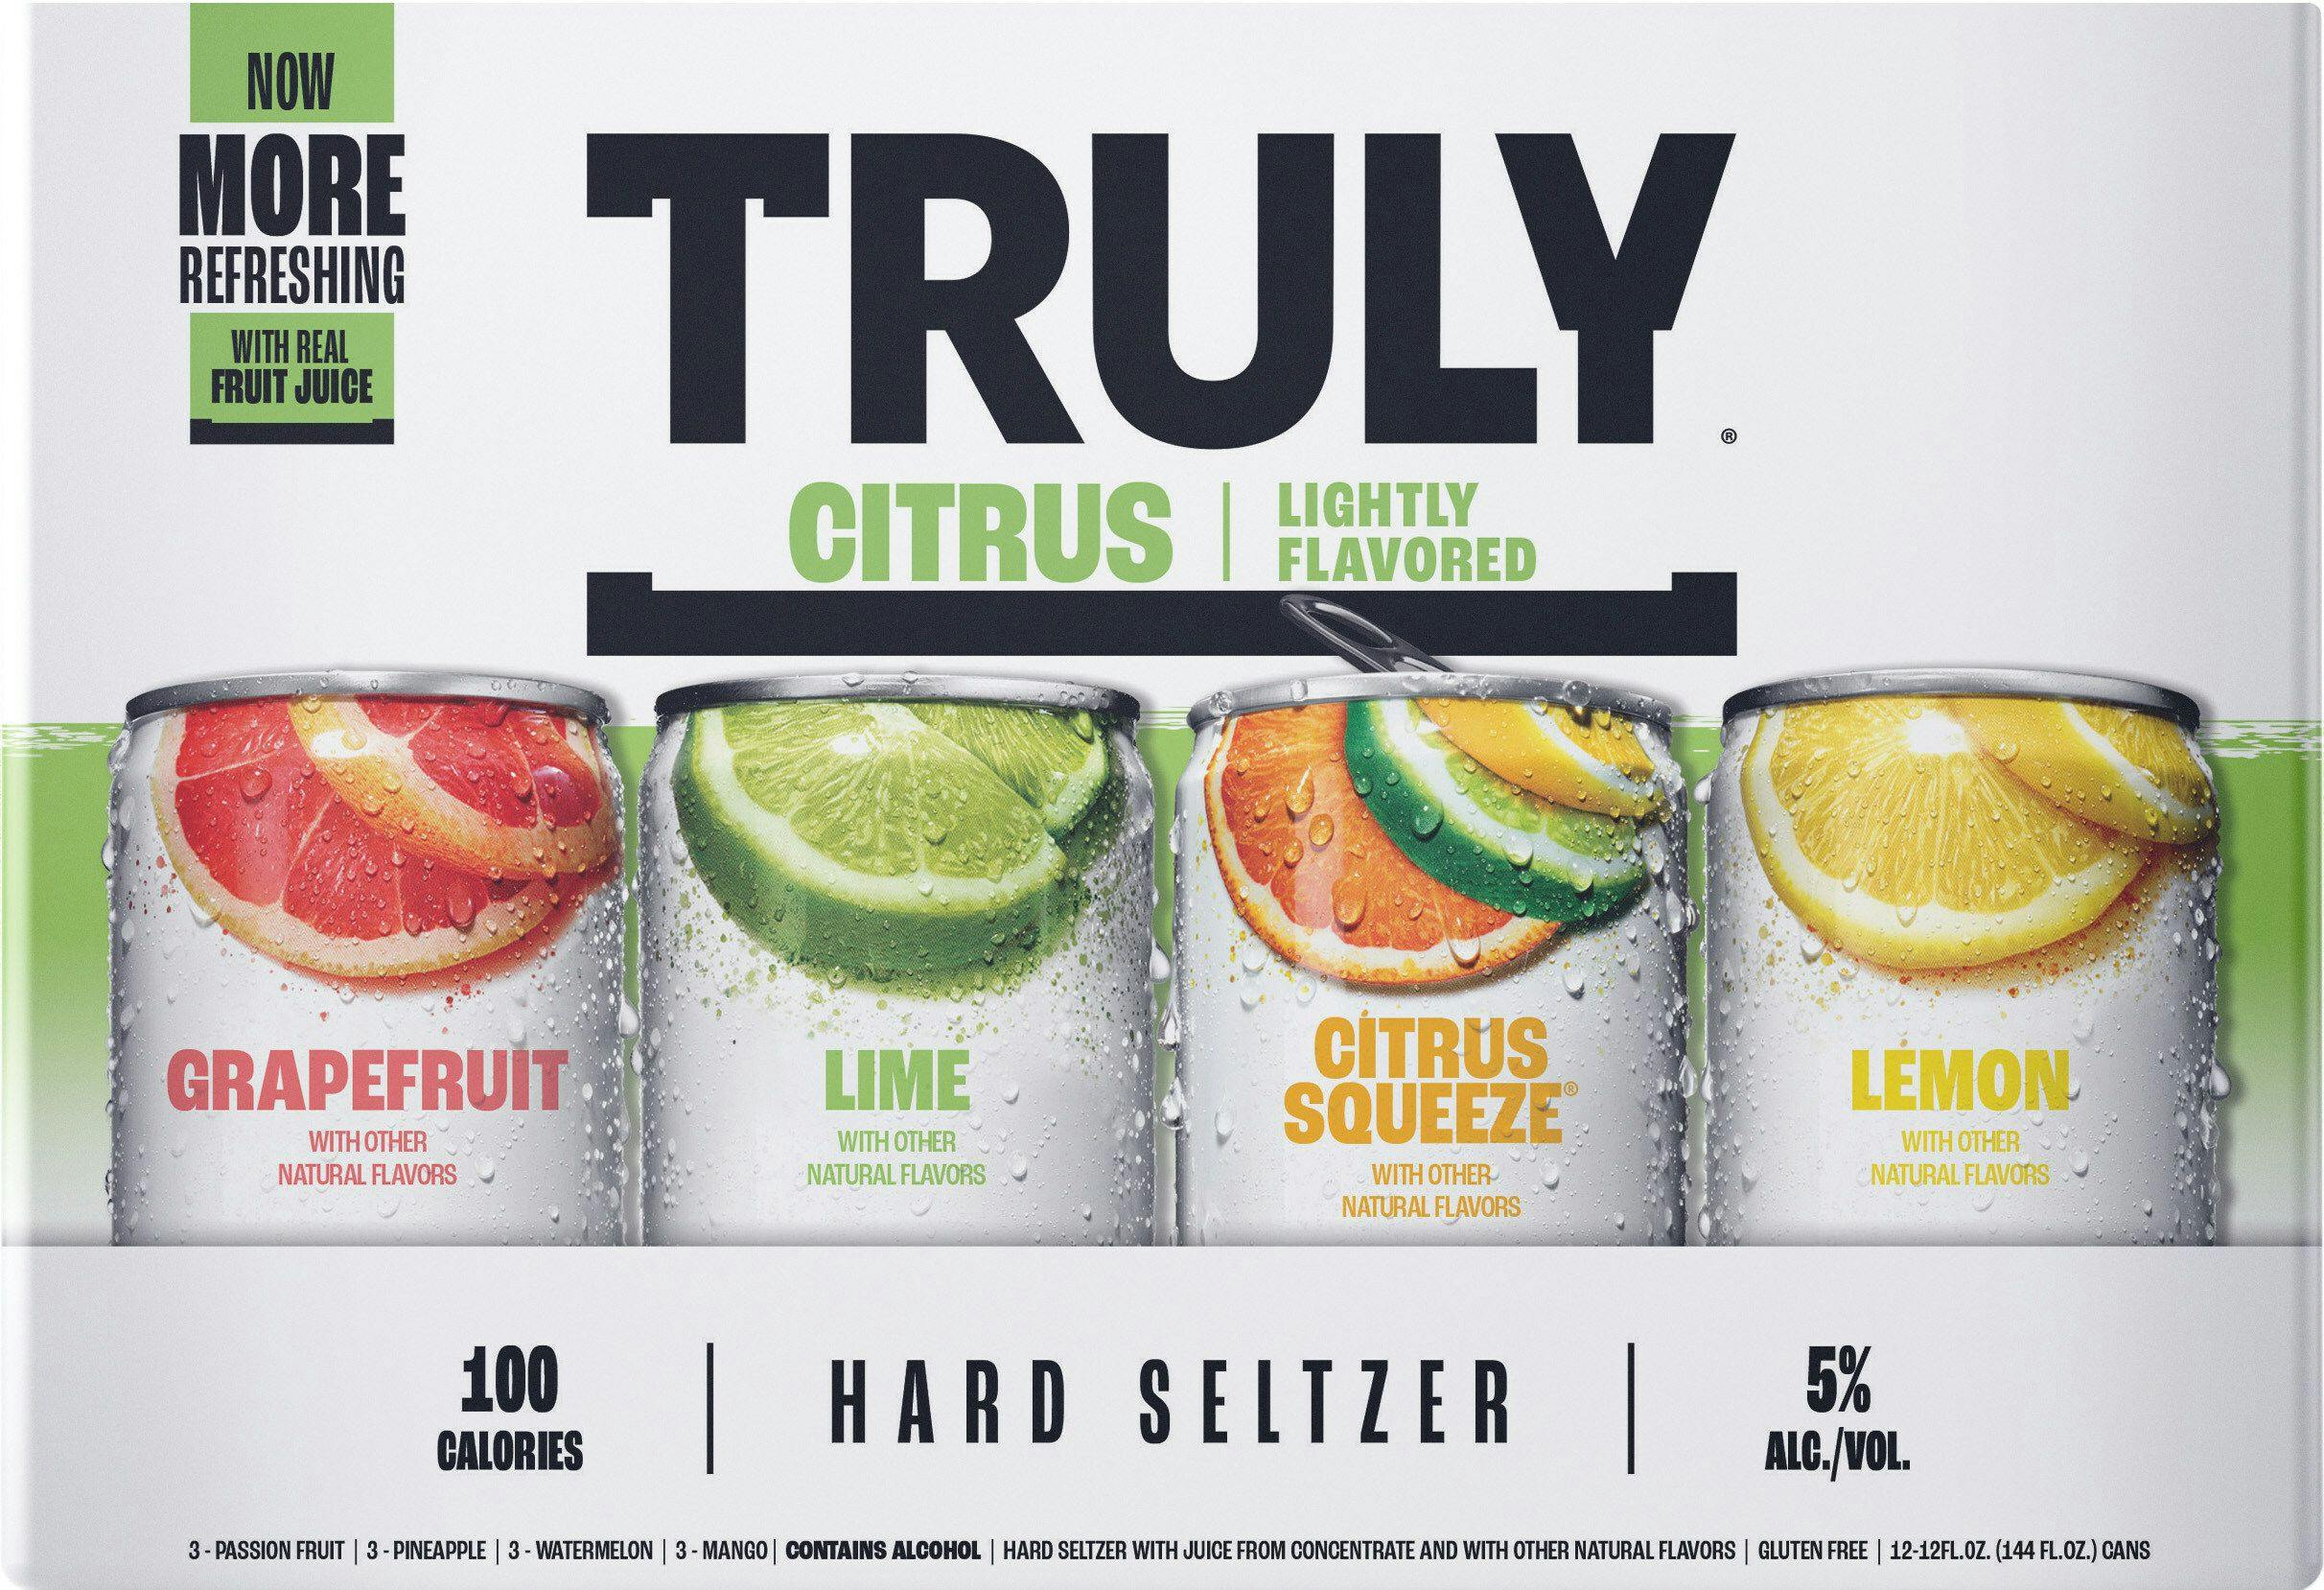 Four cans of Truly citrus